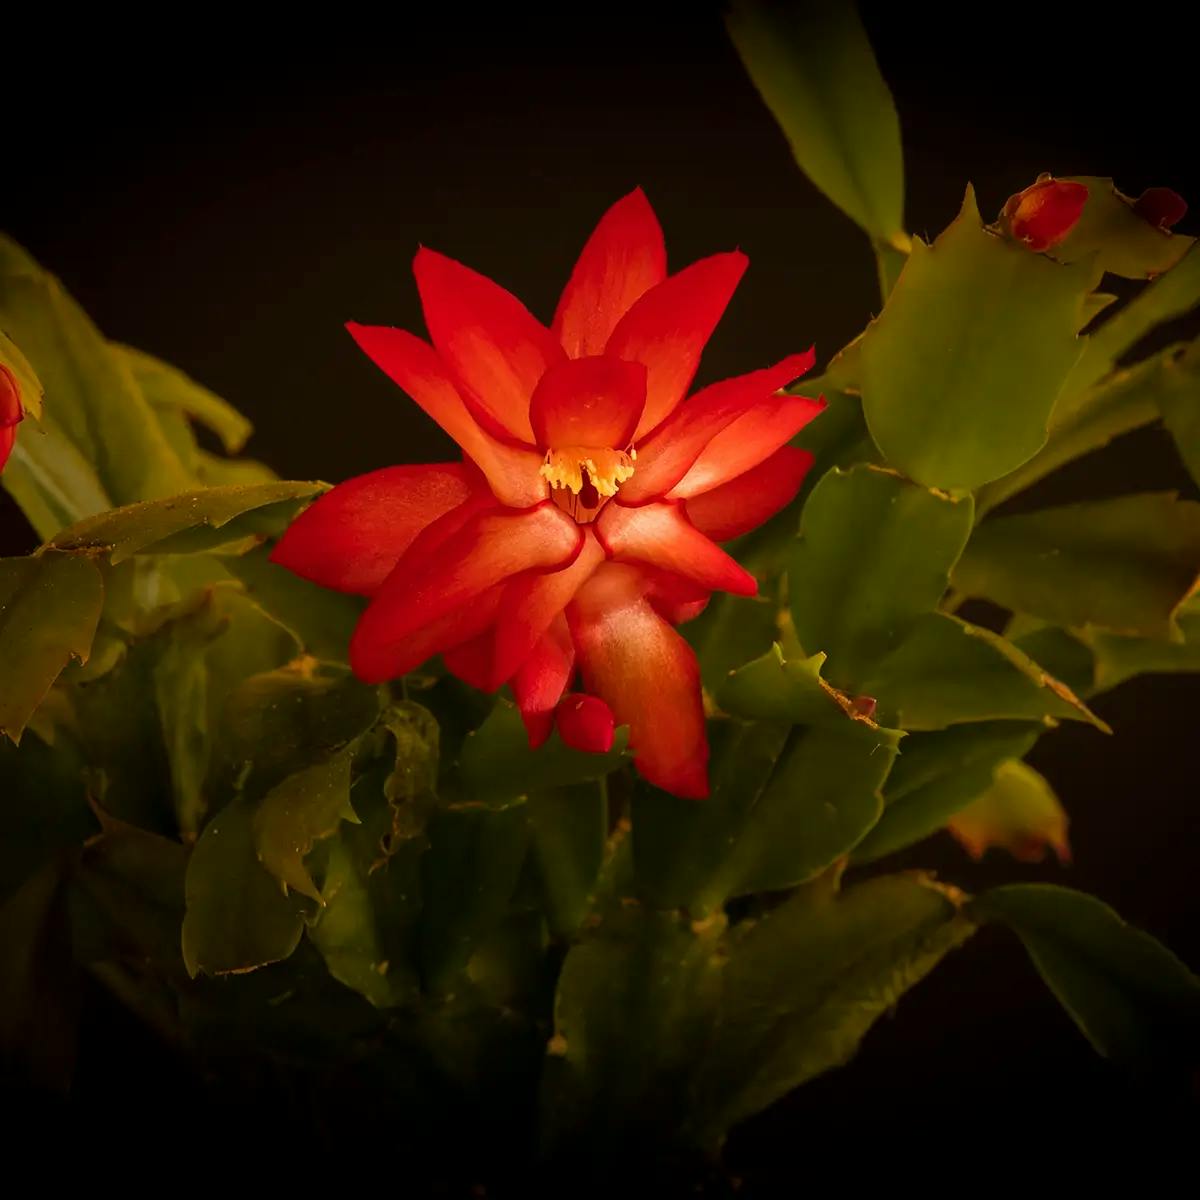 Blooming red Christmas Cactus in the dark.